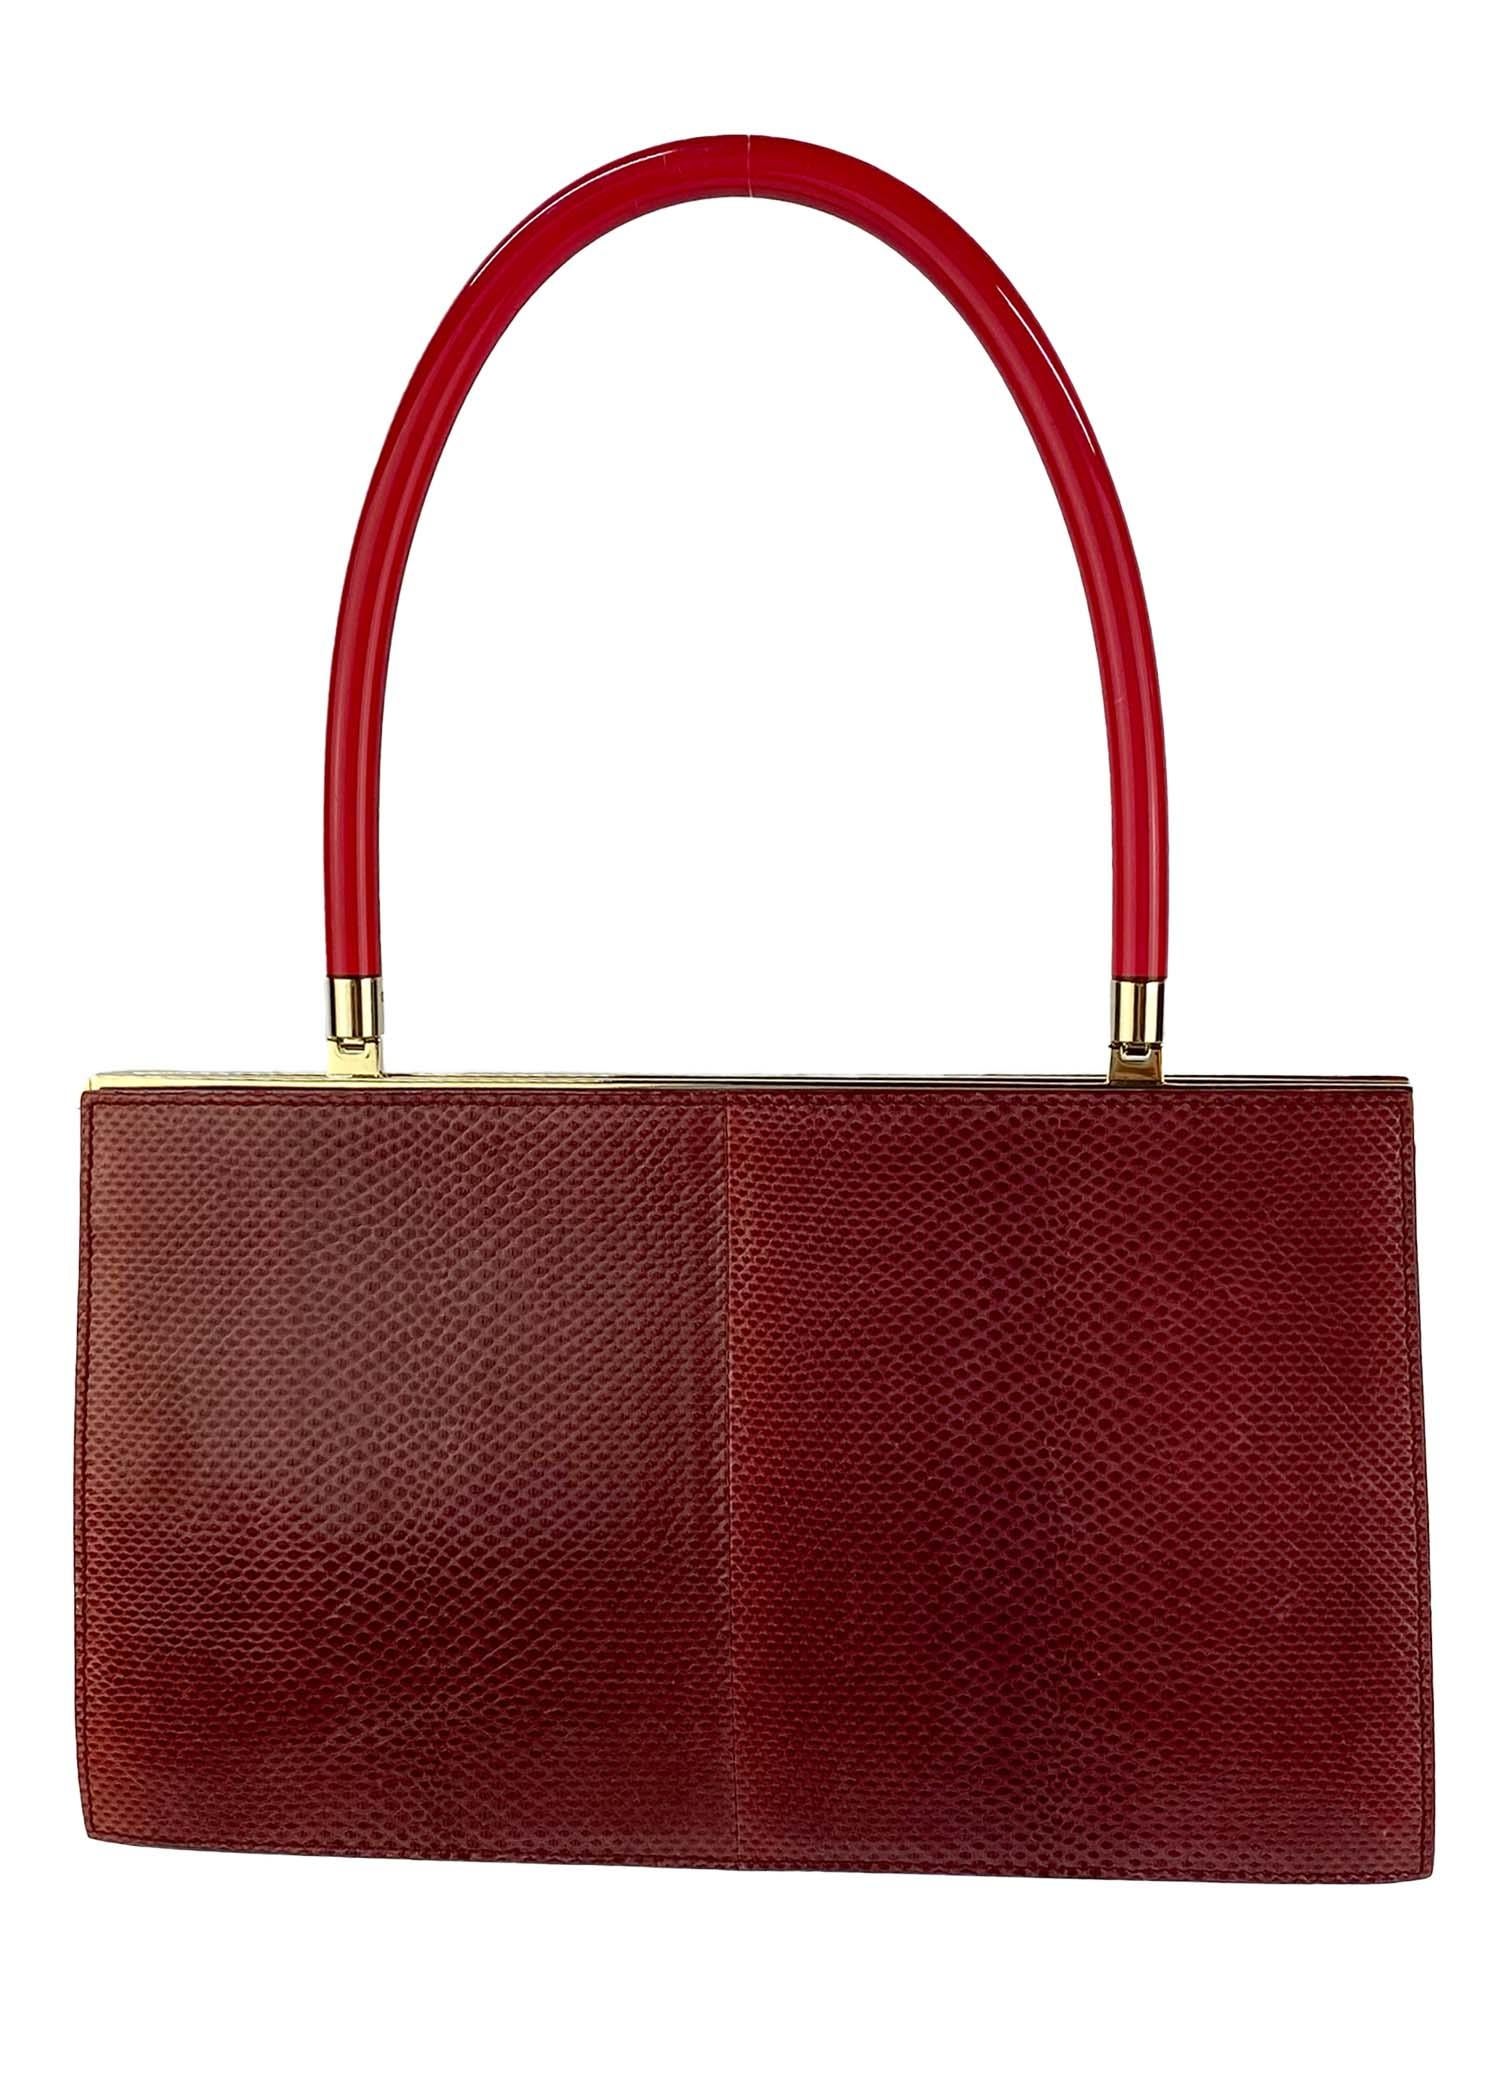 Marron Sac à main Gucci by Tom Ford rouge Karung Snake Skin Lucite S/S 1998 en vente